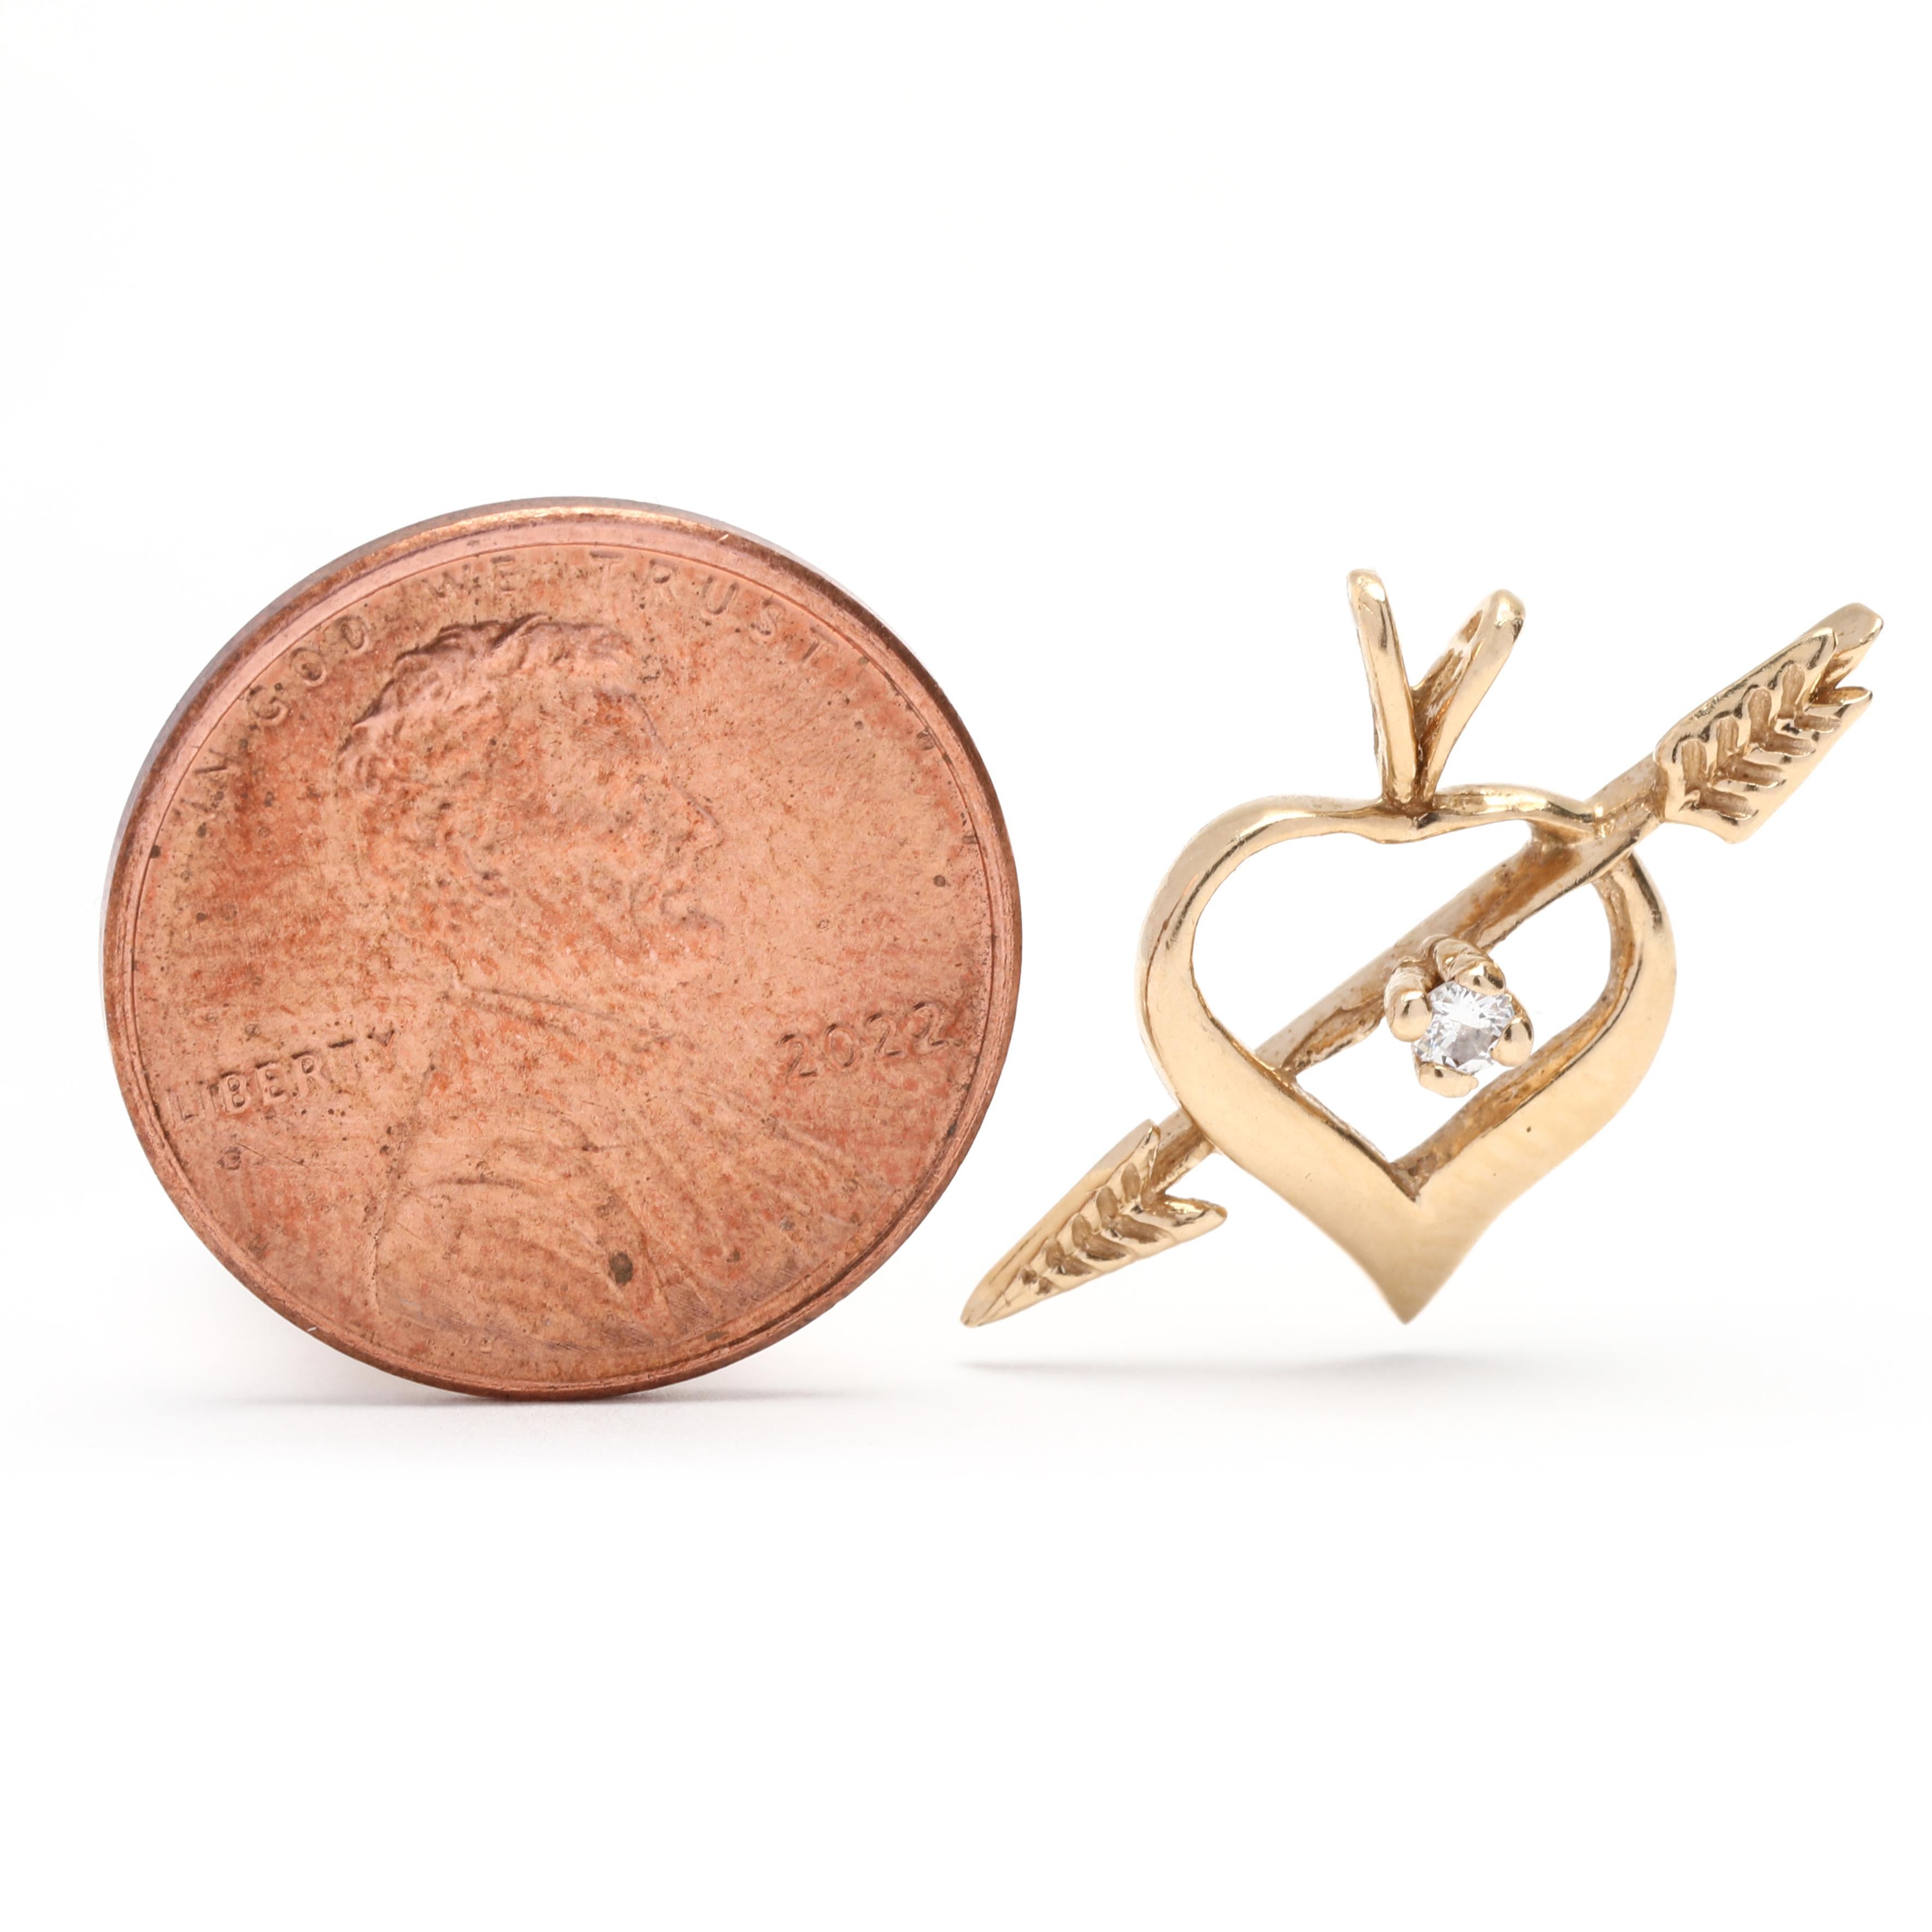 This beautiful 14K yellow gold diamond arrow through heart pendant is the perfect way to show someone you care. The 5/8 inch pendant features a sparkling open heart arrow charm with a diamond accent, sure to bring a sparkle to any outfit. Perfect as